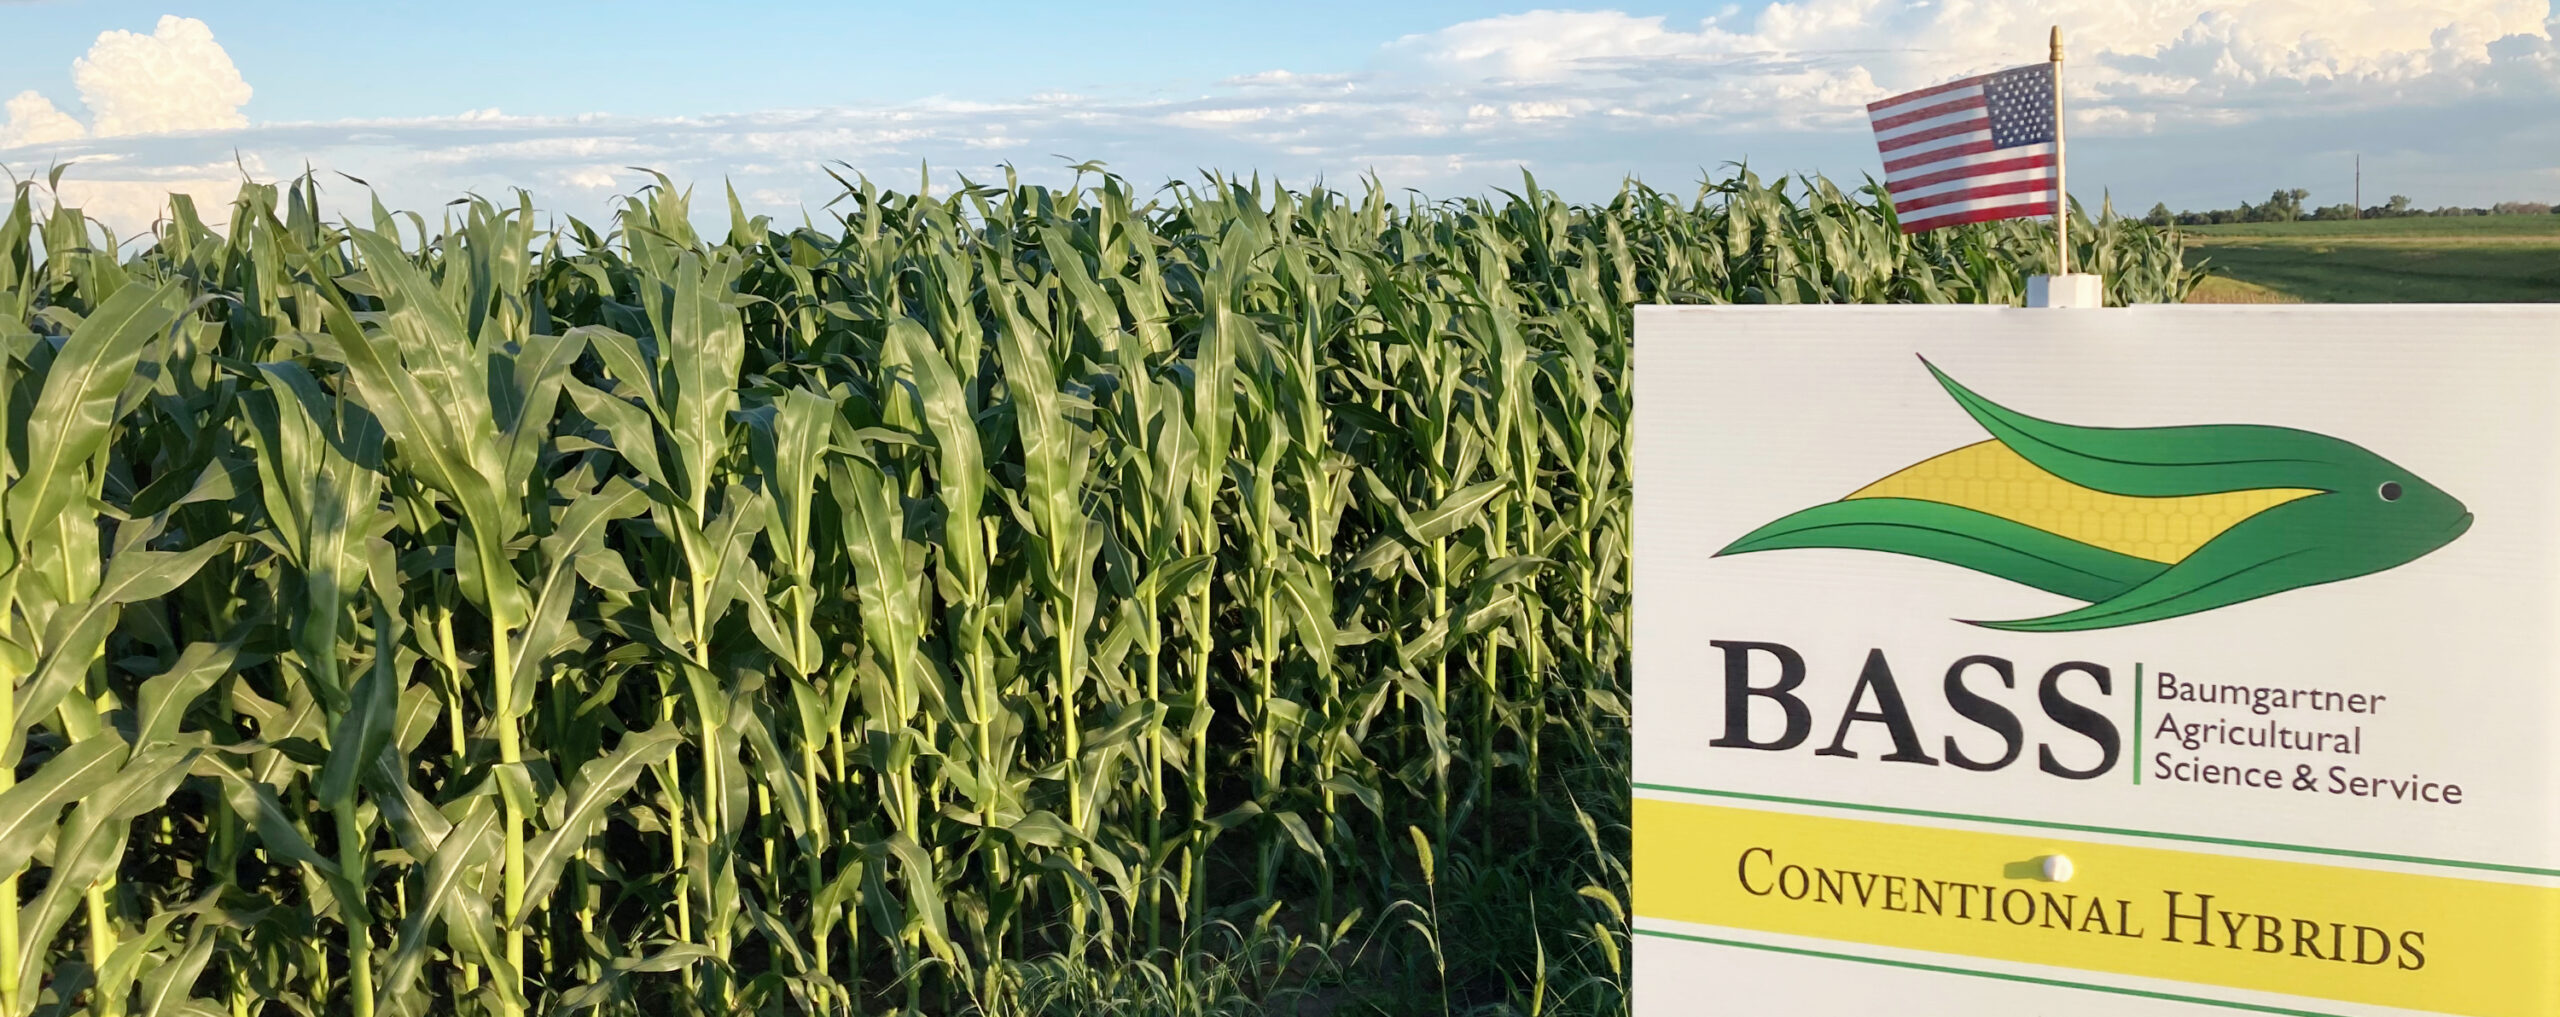 A Baumgartner Agricultural Science & Service (BASS) Conventional Hybrids sign with a USA flag above it are in front of a field of BASS hybrid corn